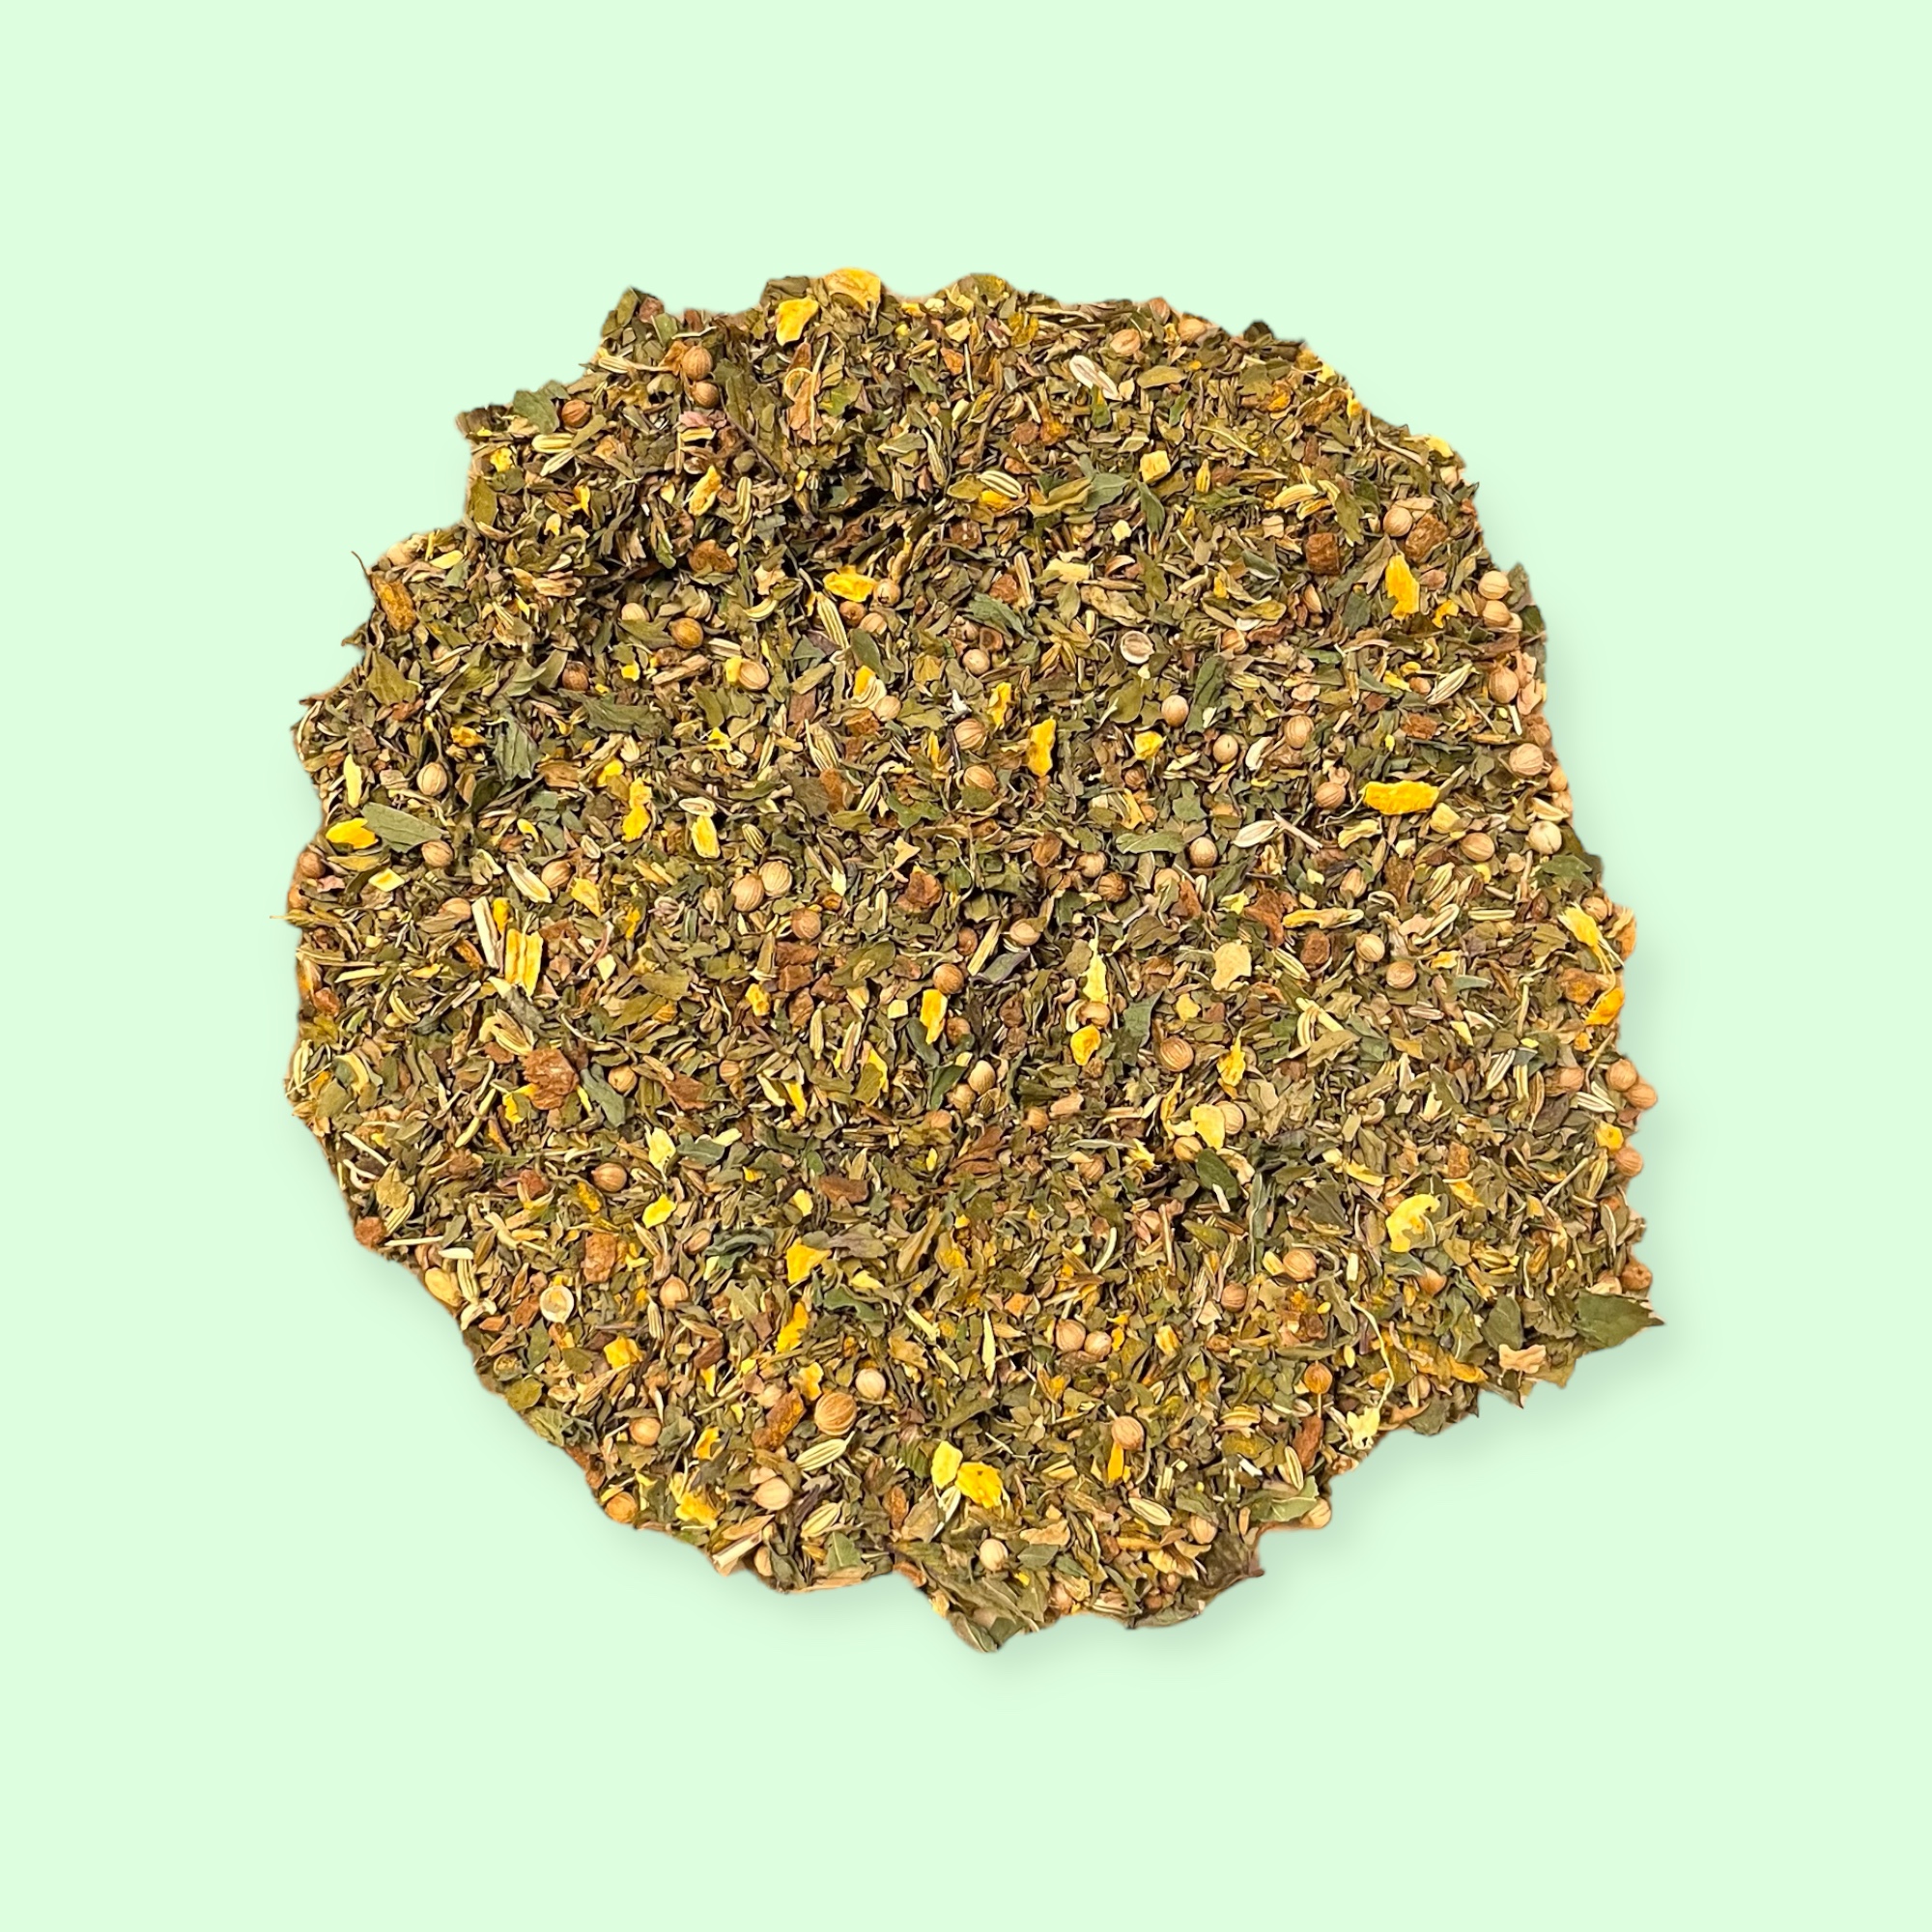 Featured image for “Digestion Tea”